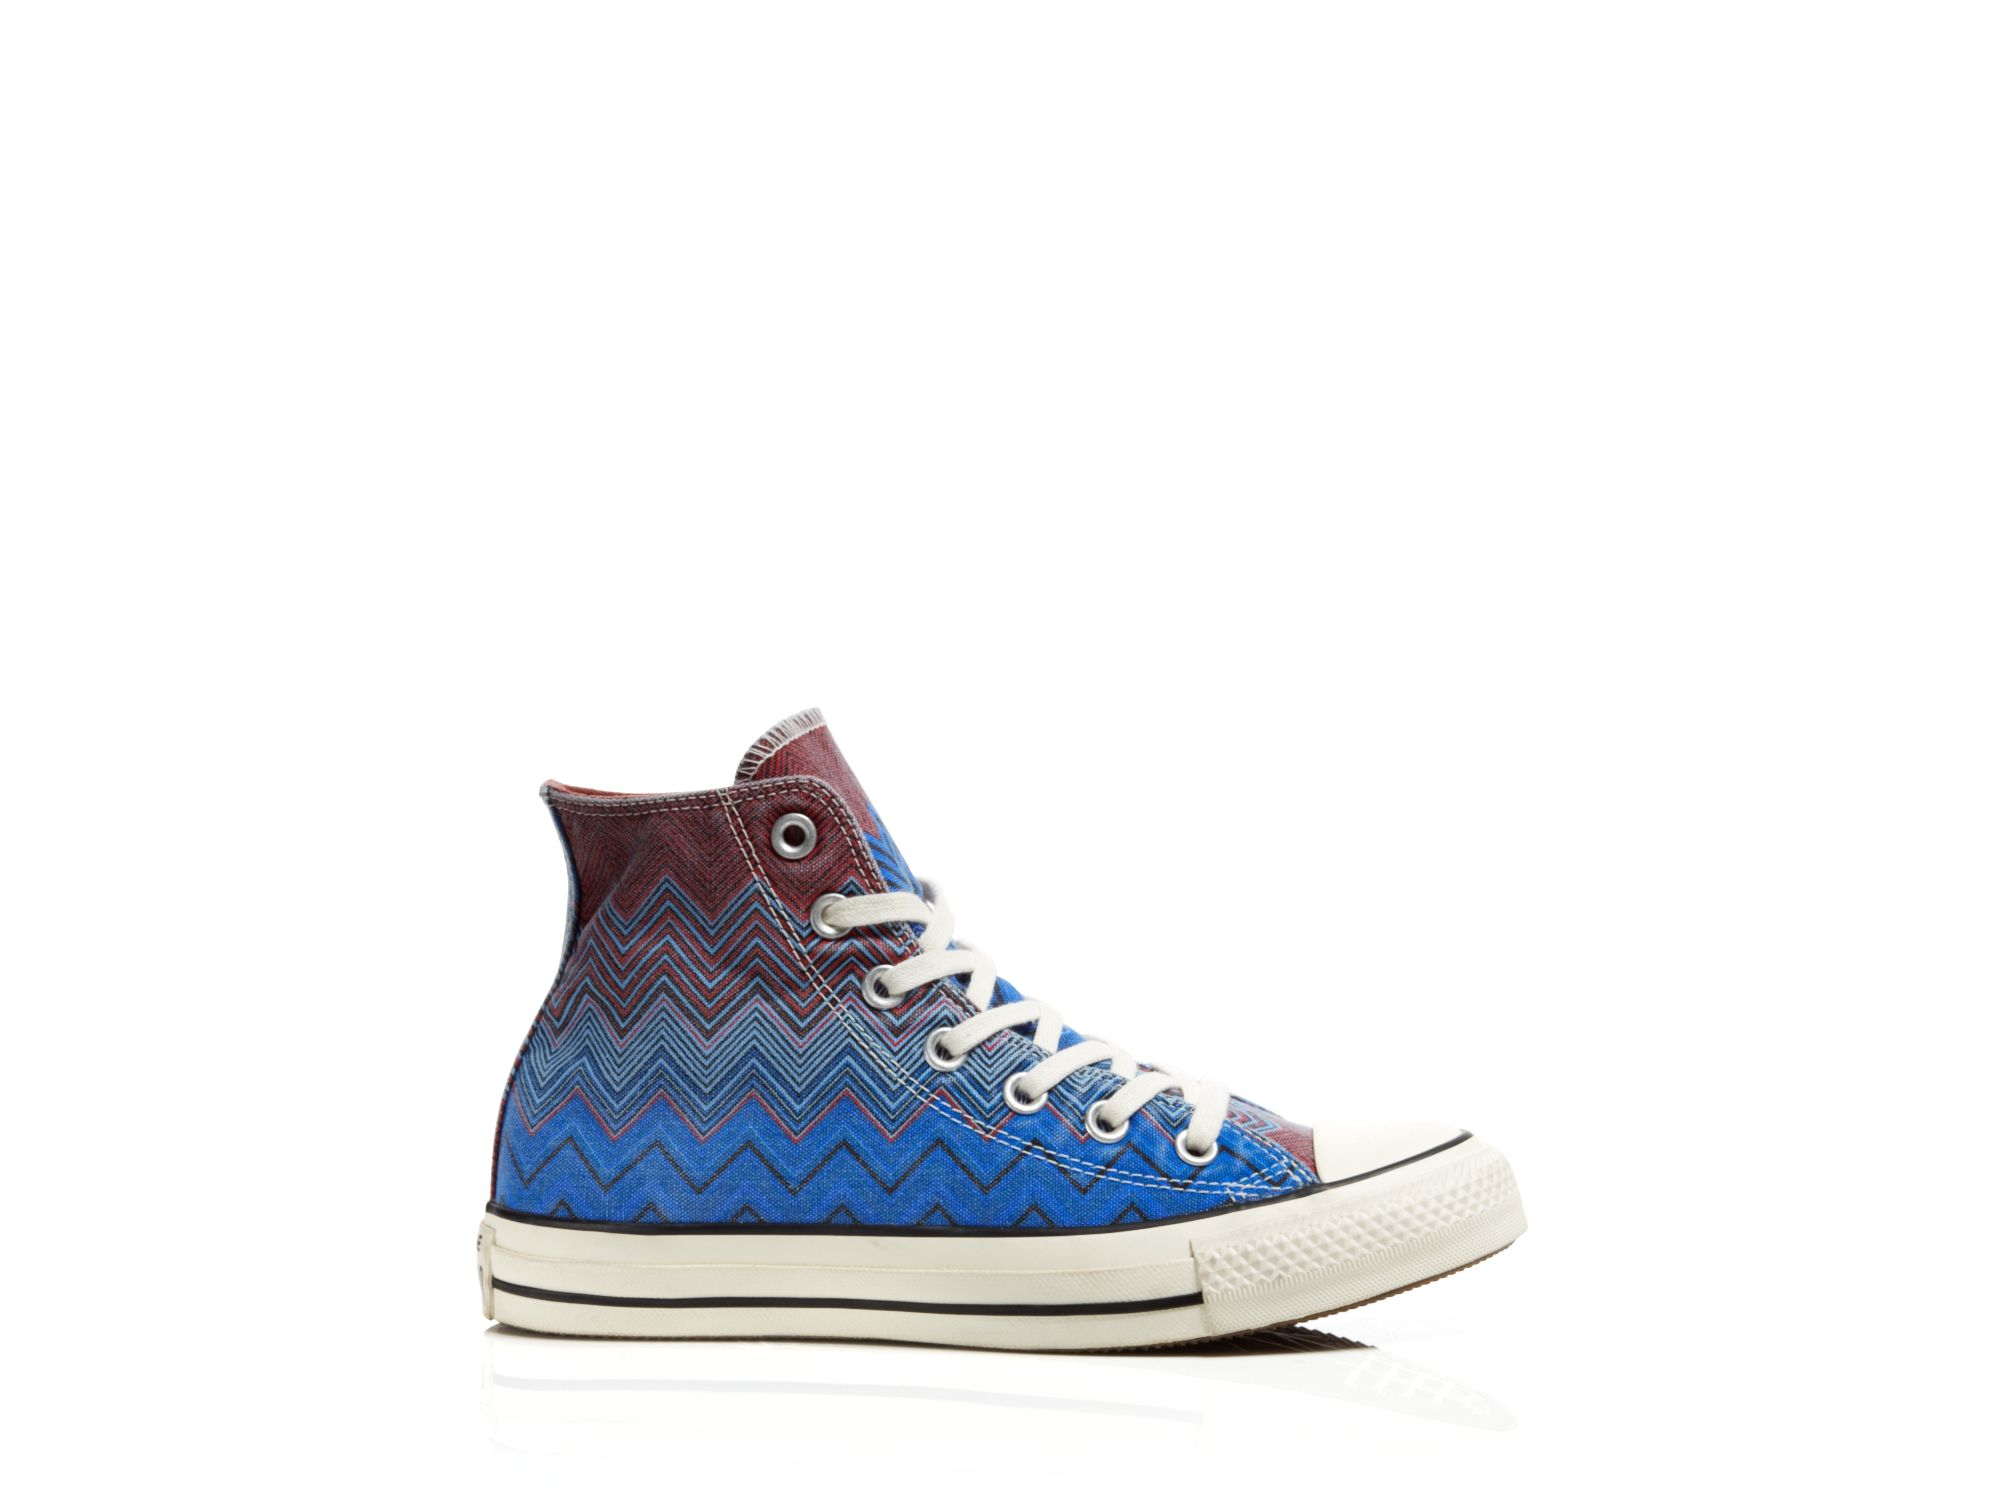 Converse Chuck Taylor All Star Missoni High Top Sneakers in Blue | Lyst